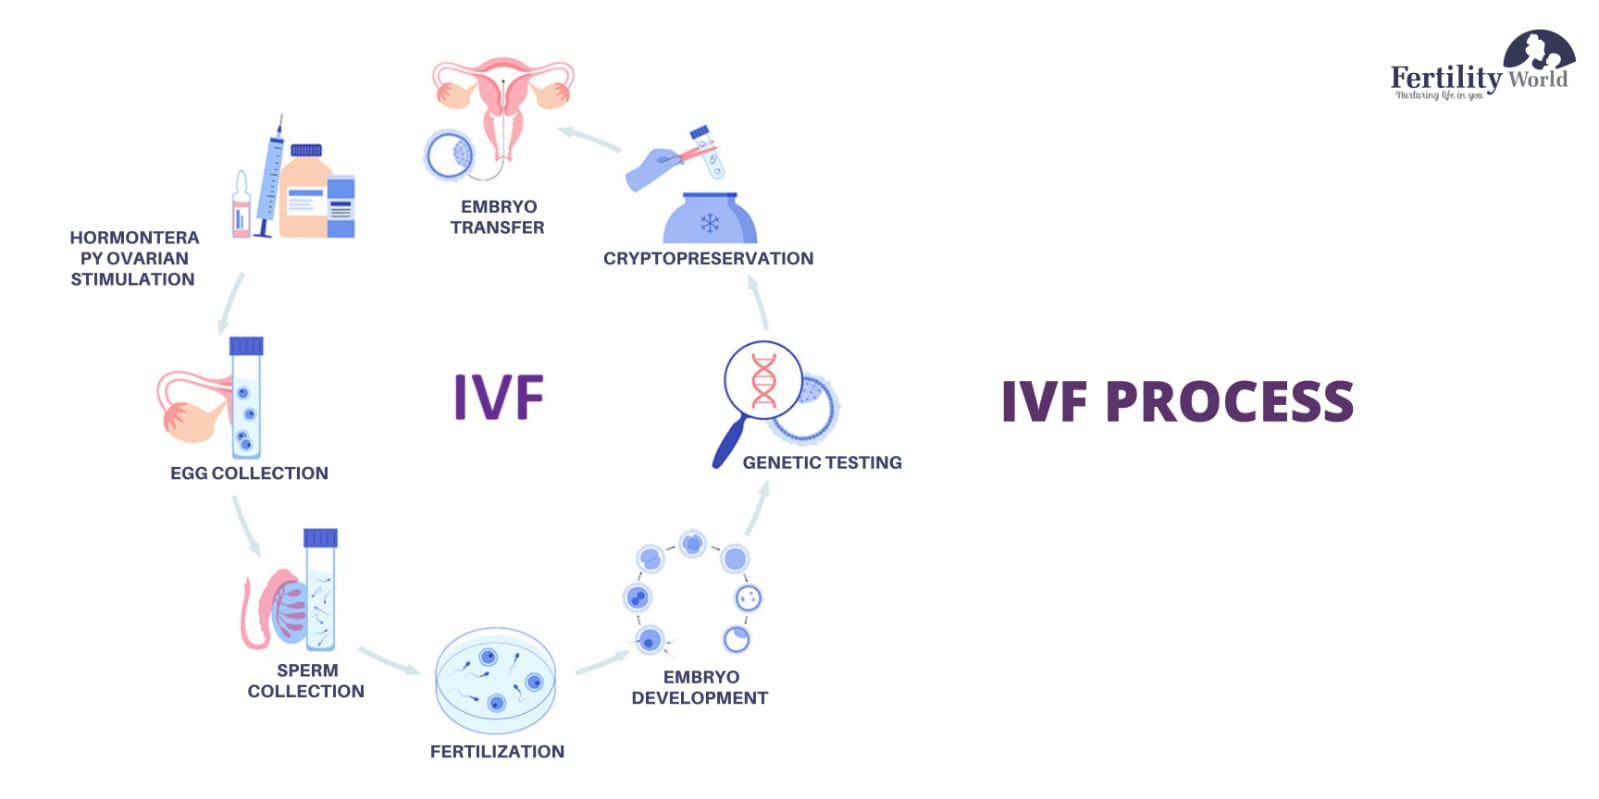 How is IVF treatment done?